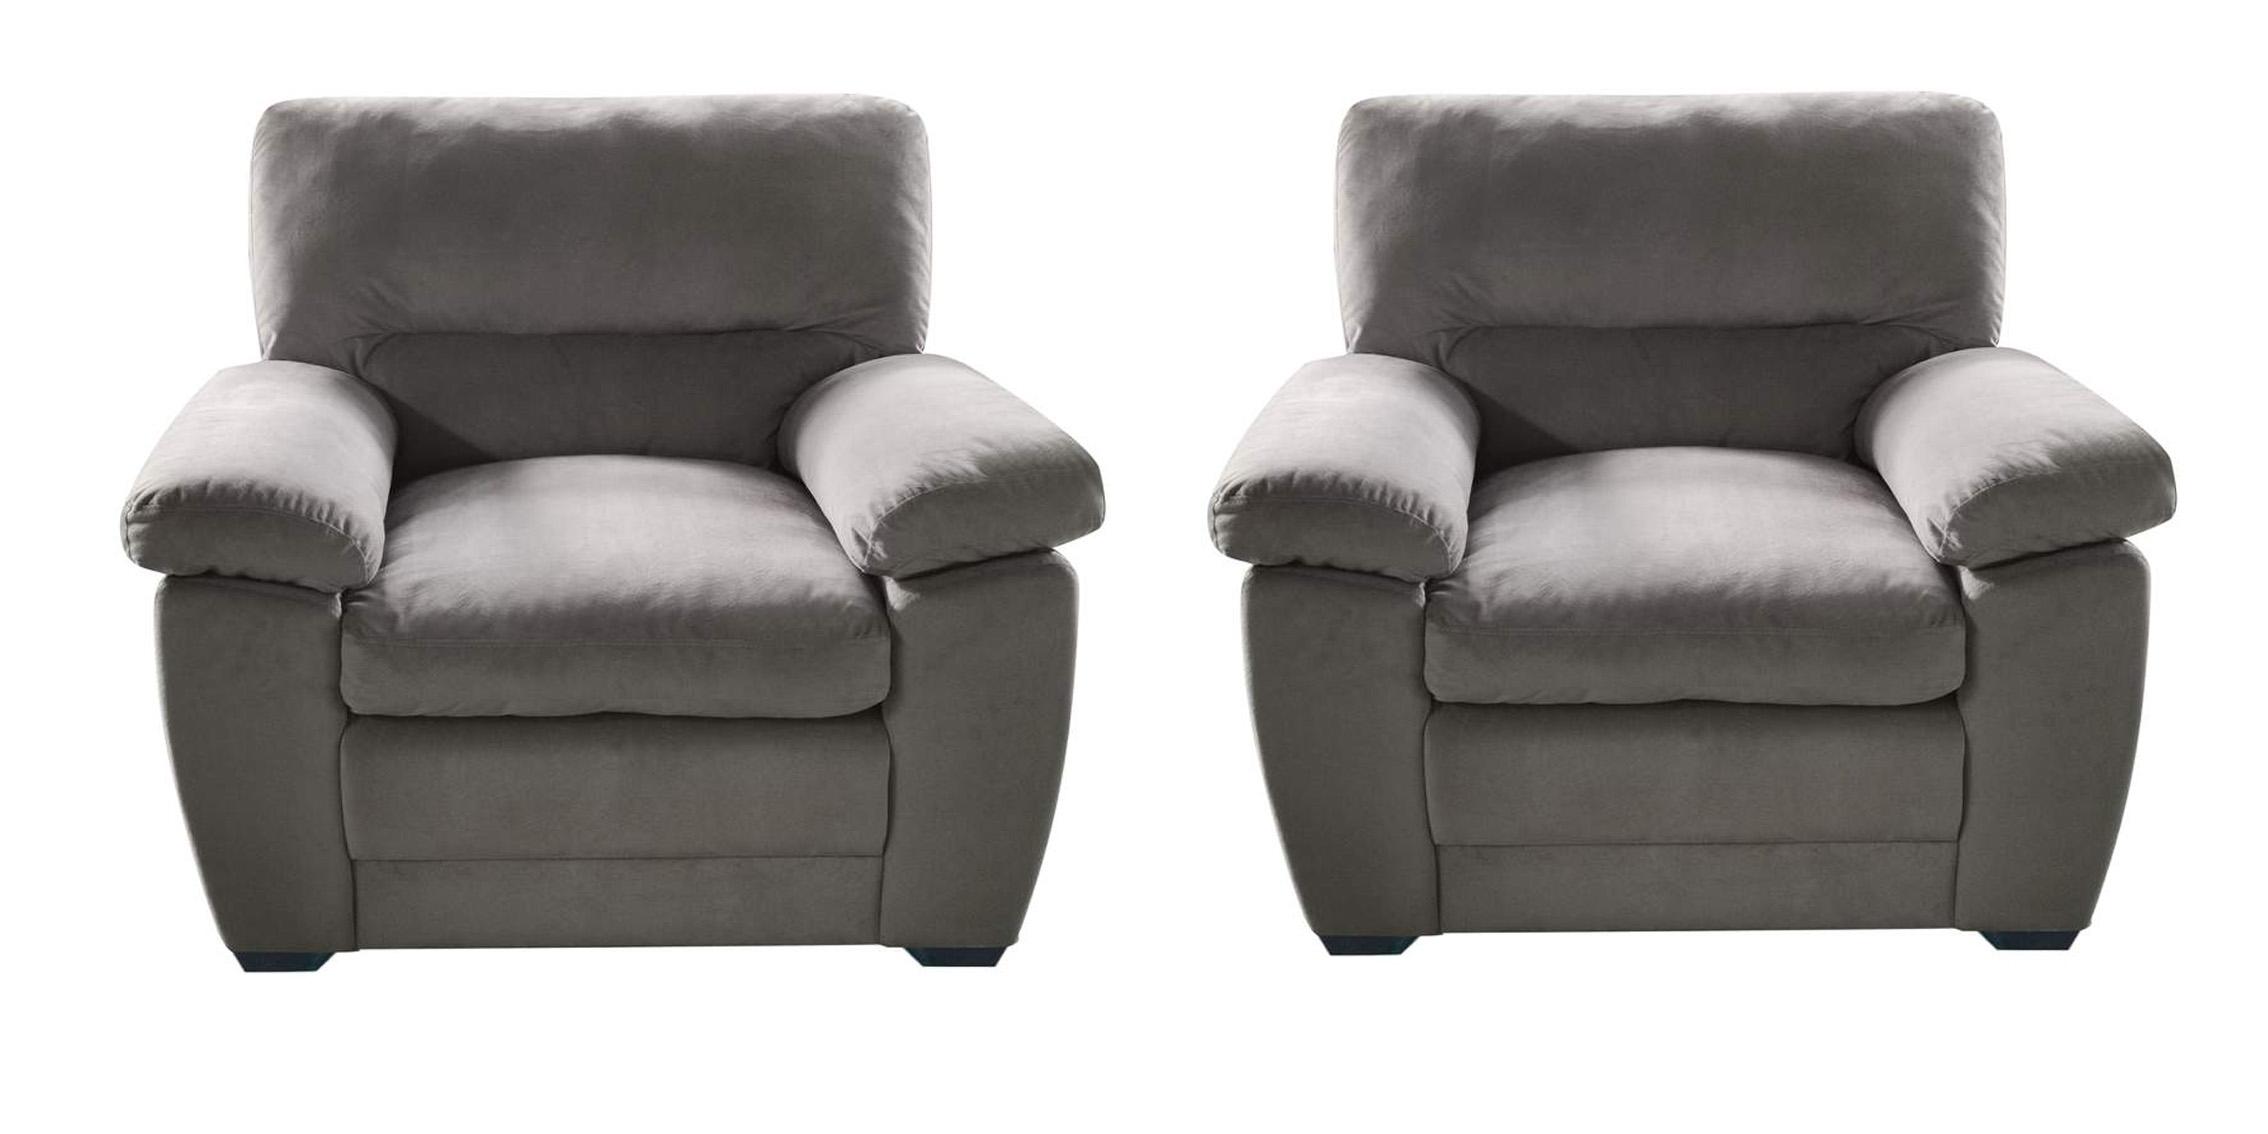 Contemporary, Modern Arm Chair Set MAXX GHF-808857548573-Set-2 in Gray Fabric